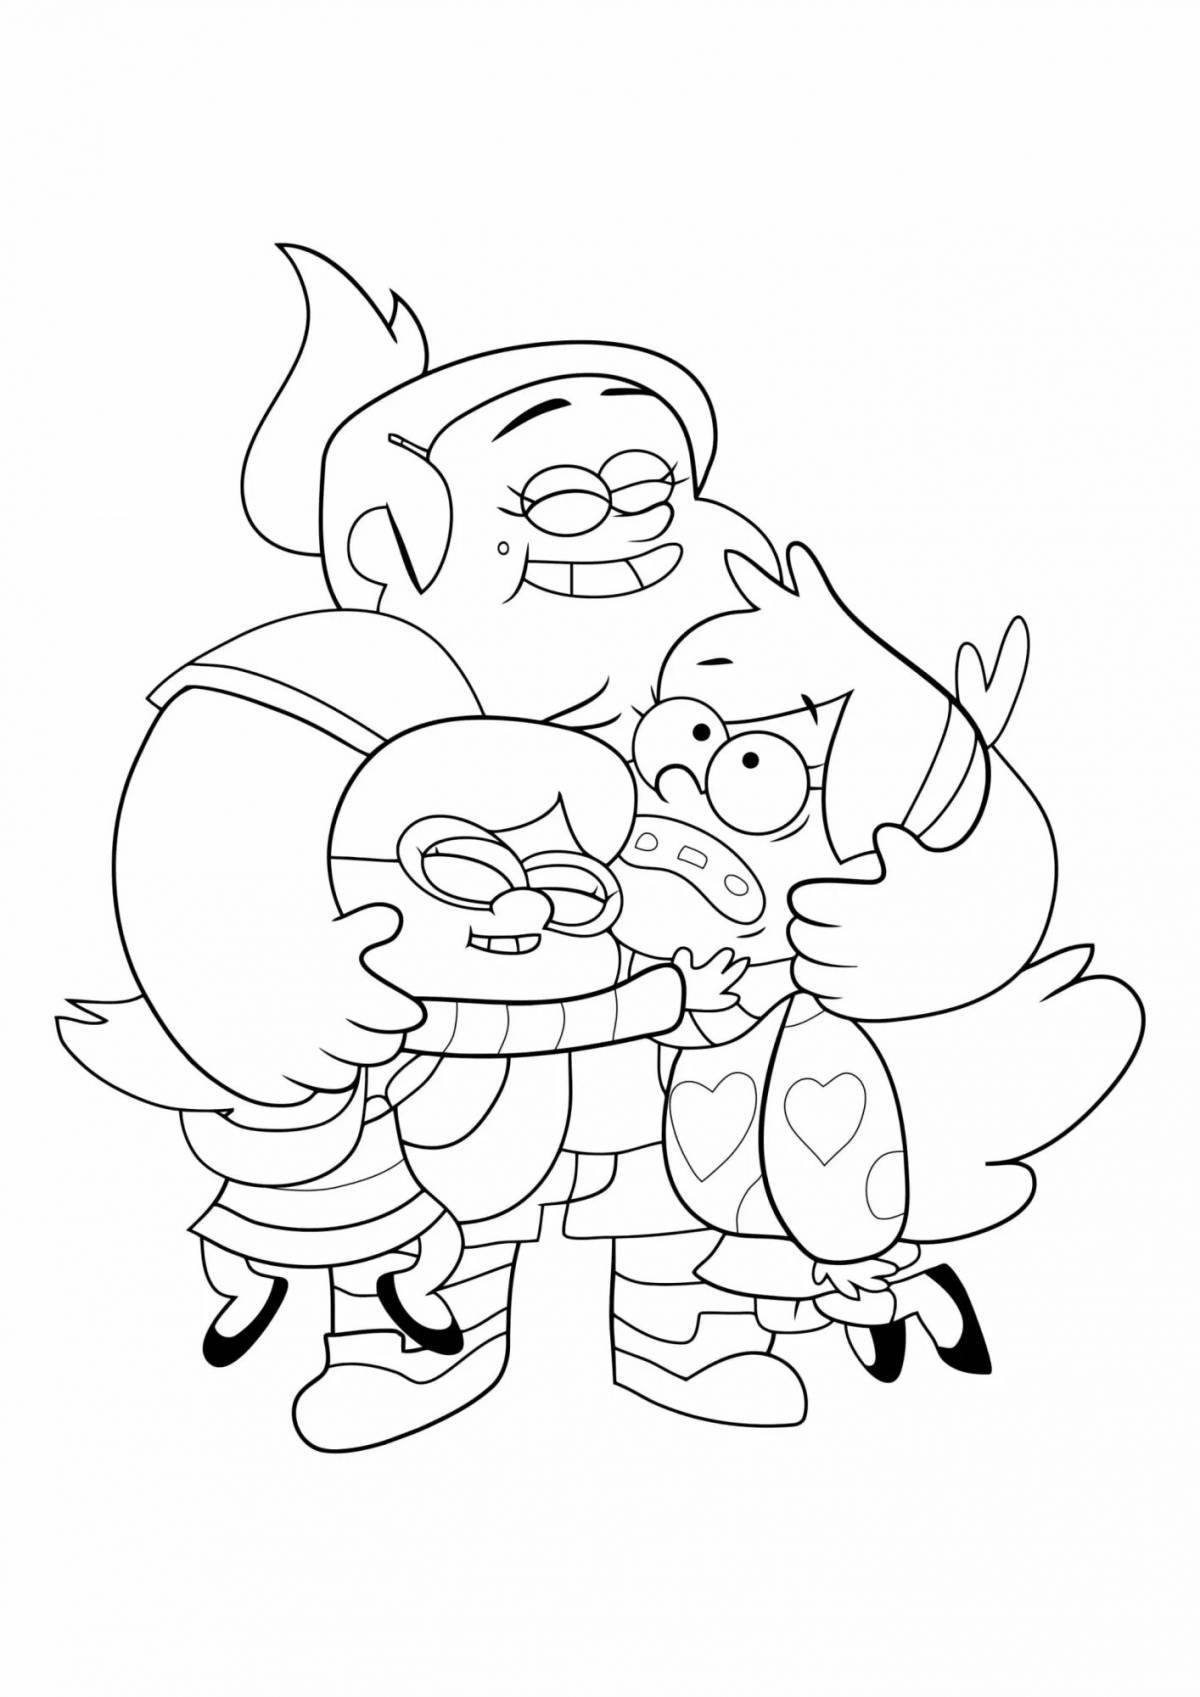 Adorable Gravity Falls Pig Coloring Page